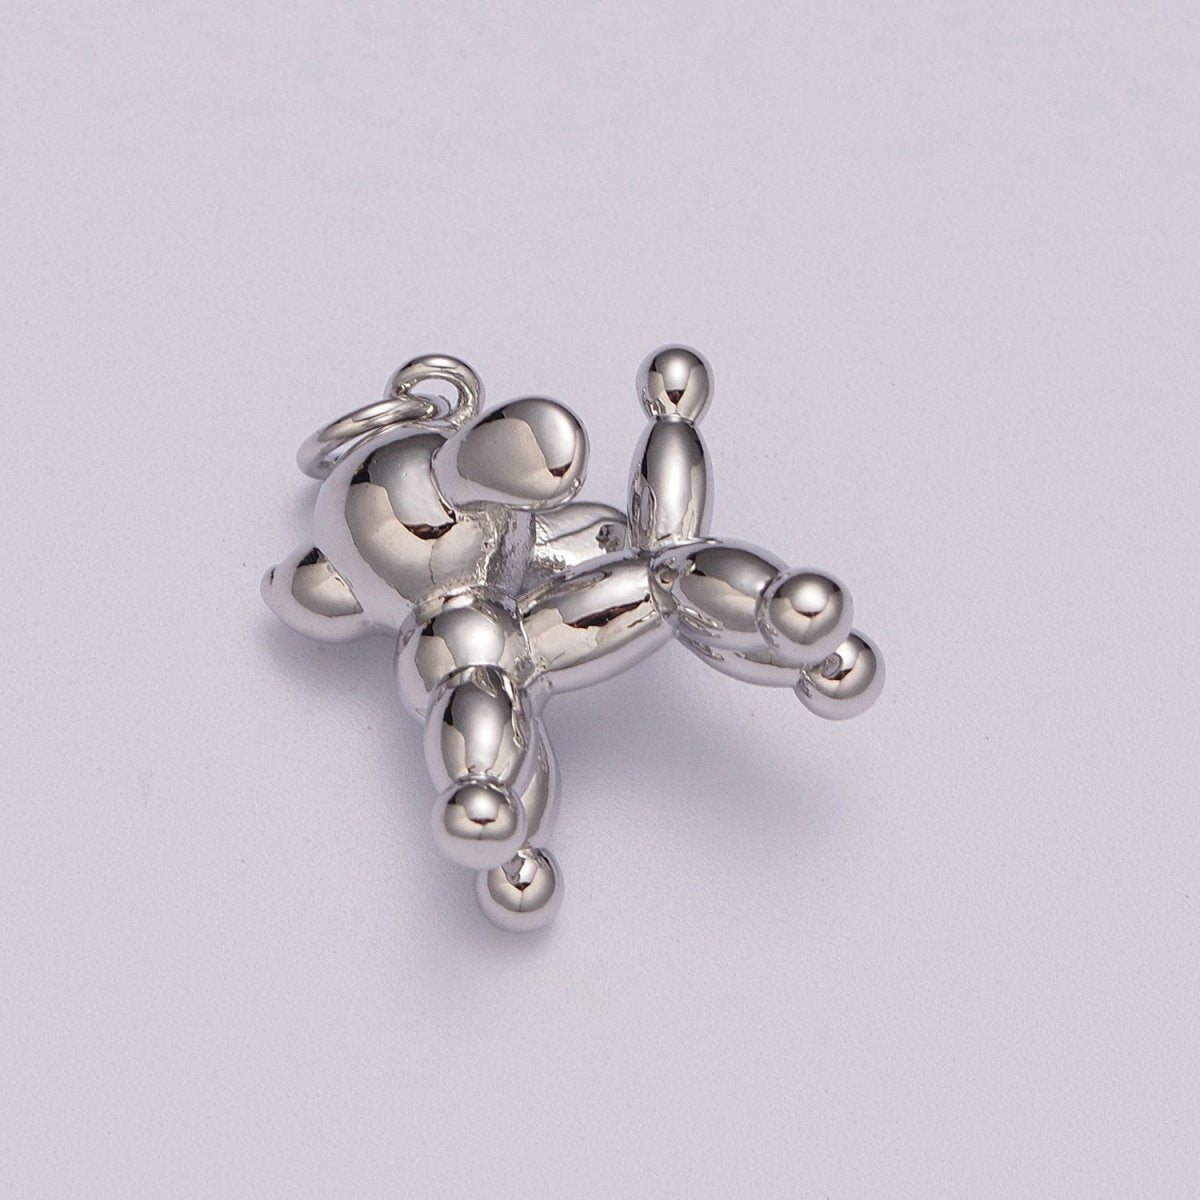 Gold Filled Balloon Dog Charm, 3D Balloon Dog, Animal Balloon Charm, Balloon Animal, Gift for Dog Lover, Funny Charm for Kids, Party Dog M-898 M-899 - DLUXCA